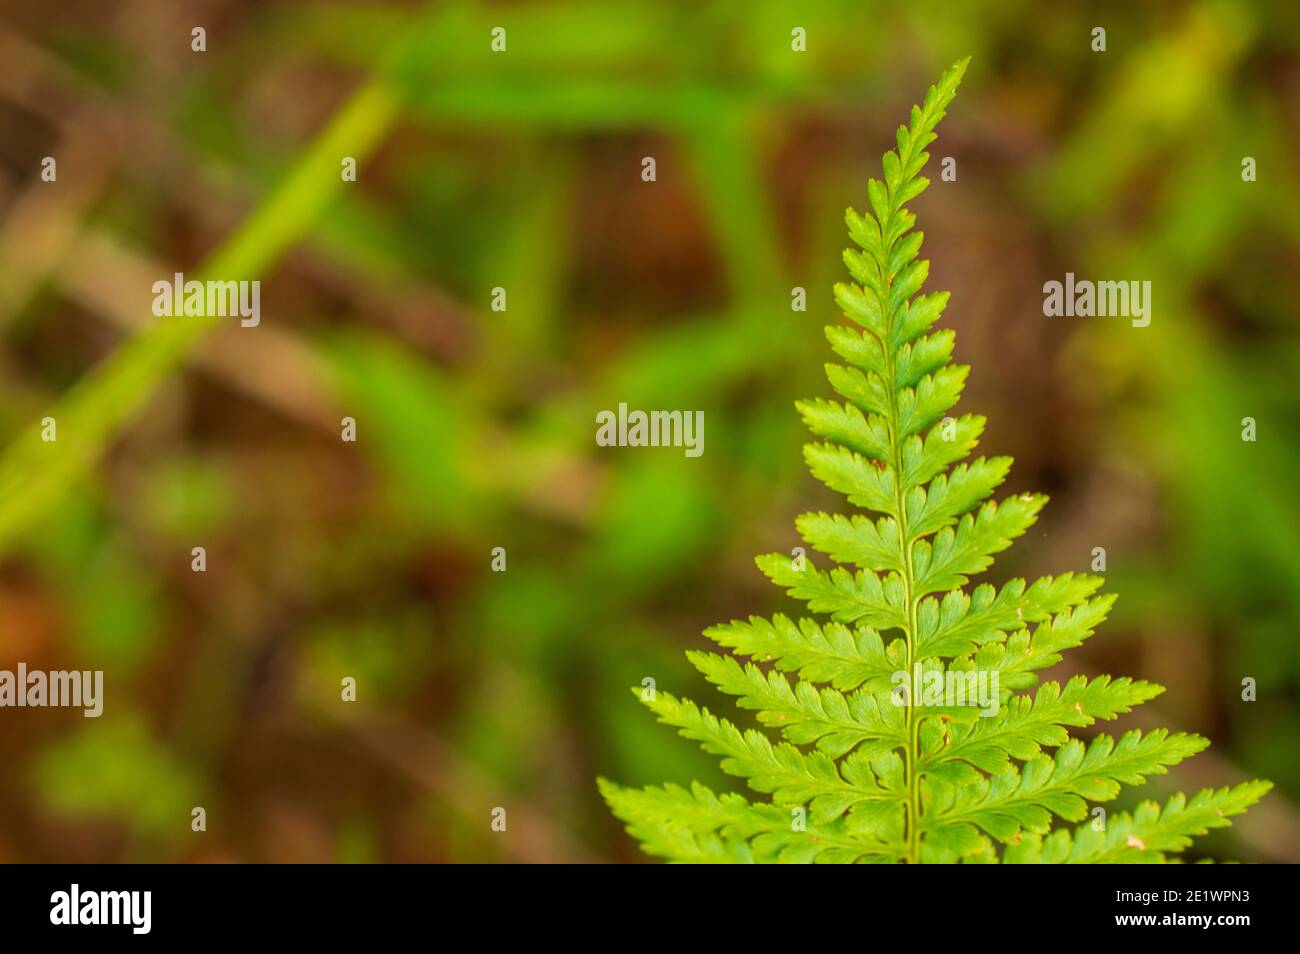 Wild green plants grow in unattended places all over the world in many different climate zones. Stock Photo